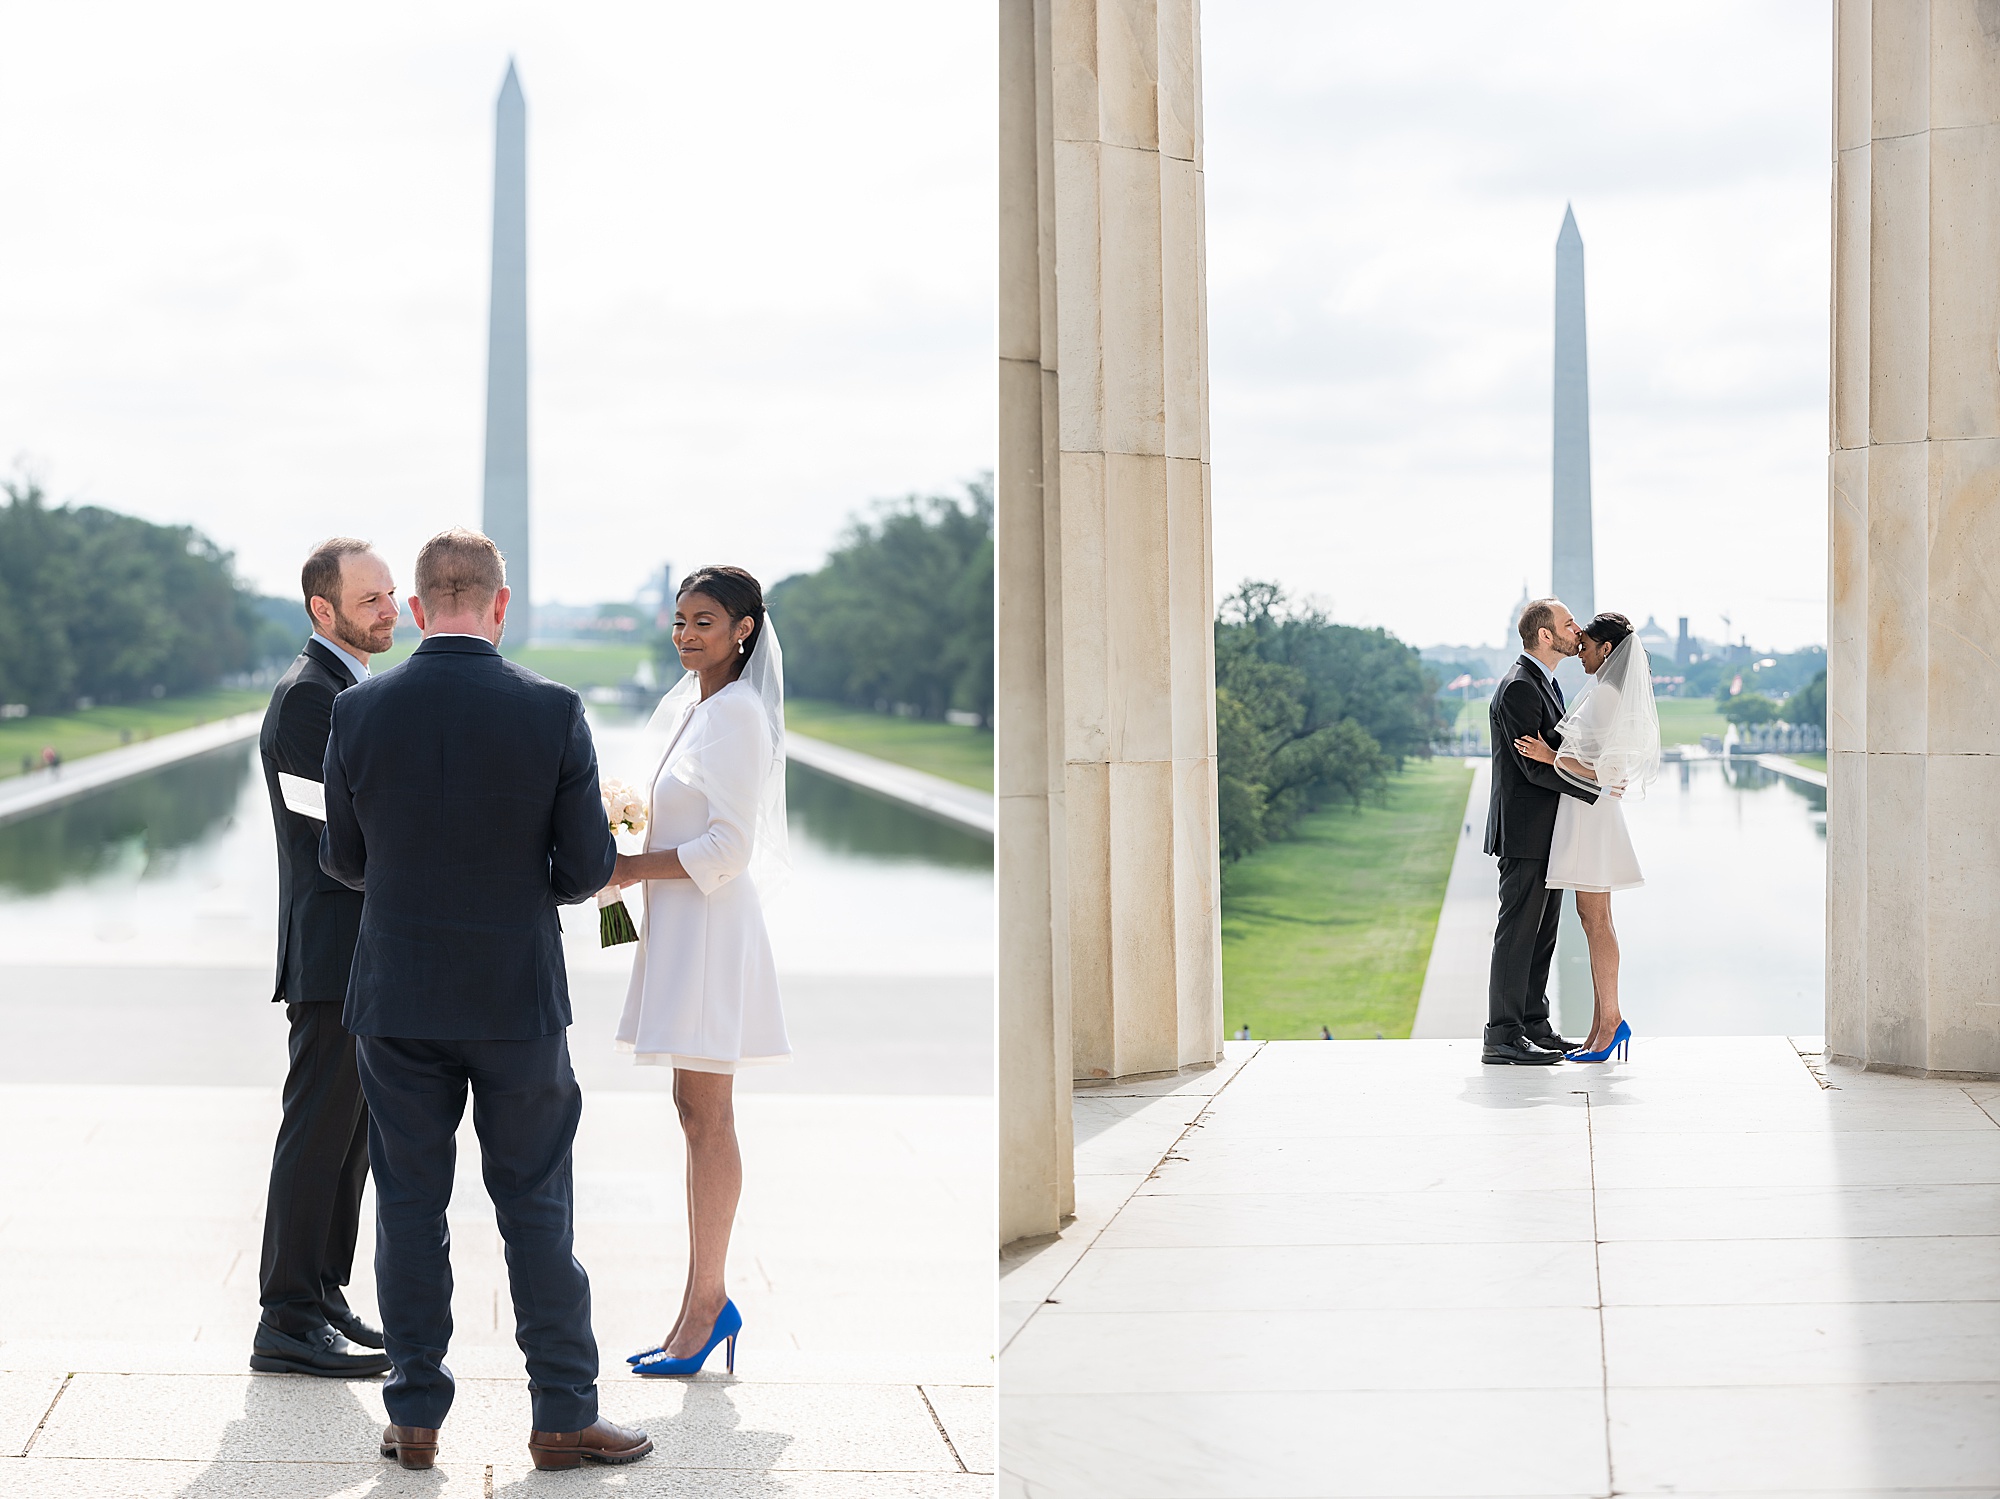 Lincoln Memorial wedding ceremony with Reflecting Pool behind couple 